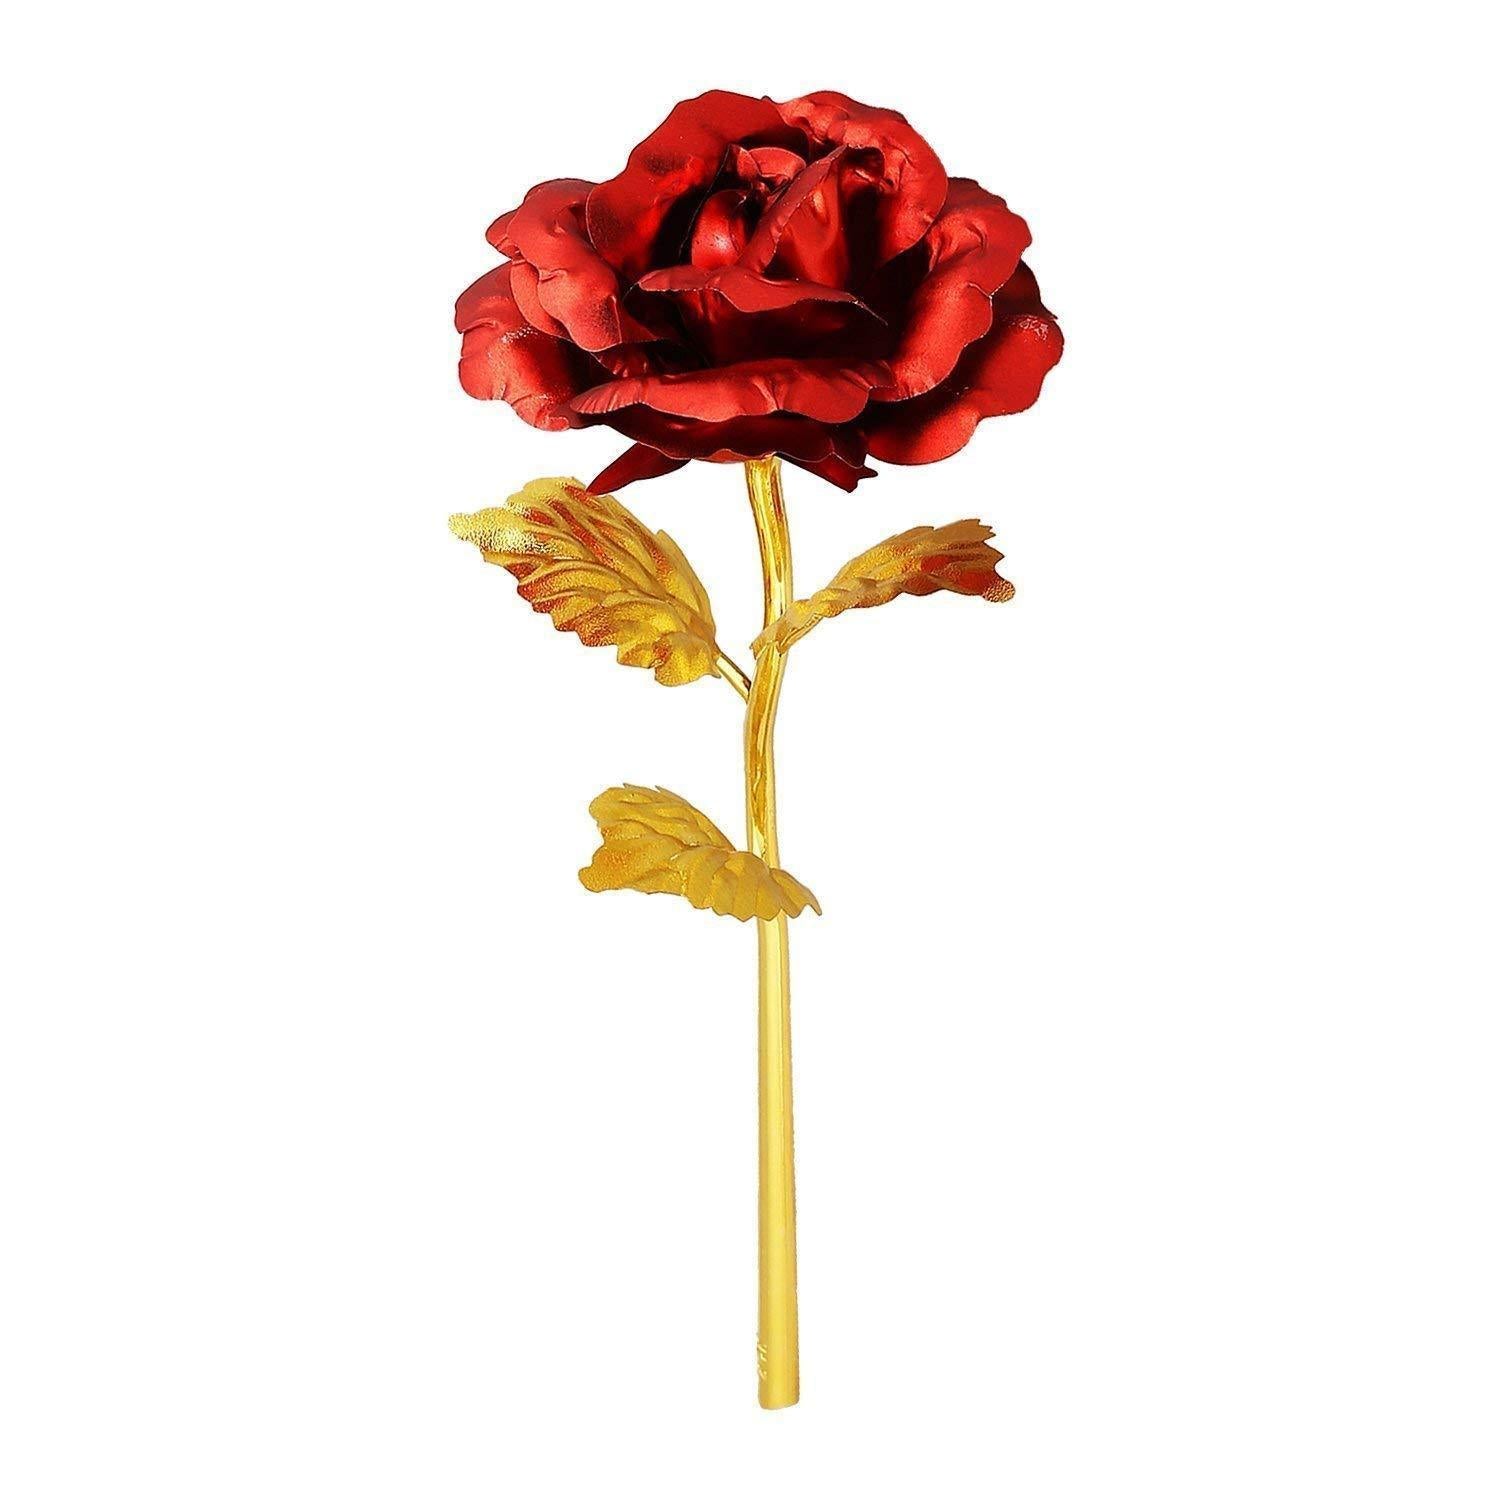 0879 24K Artificial Golden Rose/Gold Red Rose with Gift Box (10 inches) - SkyShopy